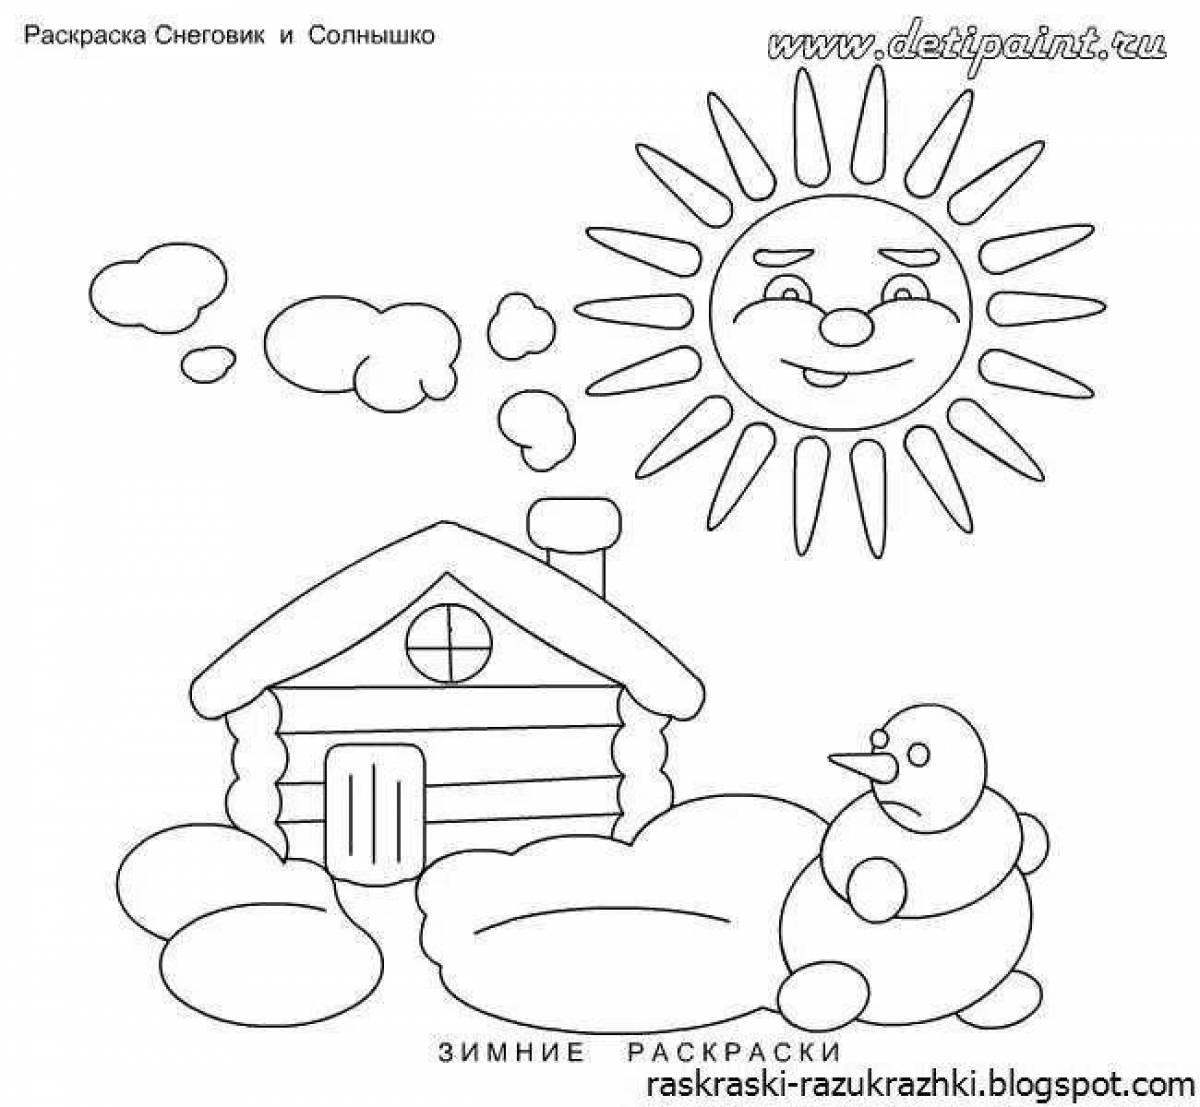 Fun coloring for middle group children